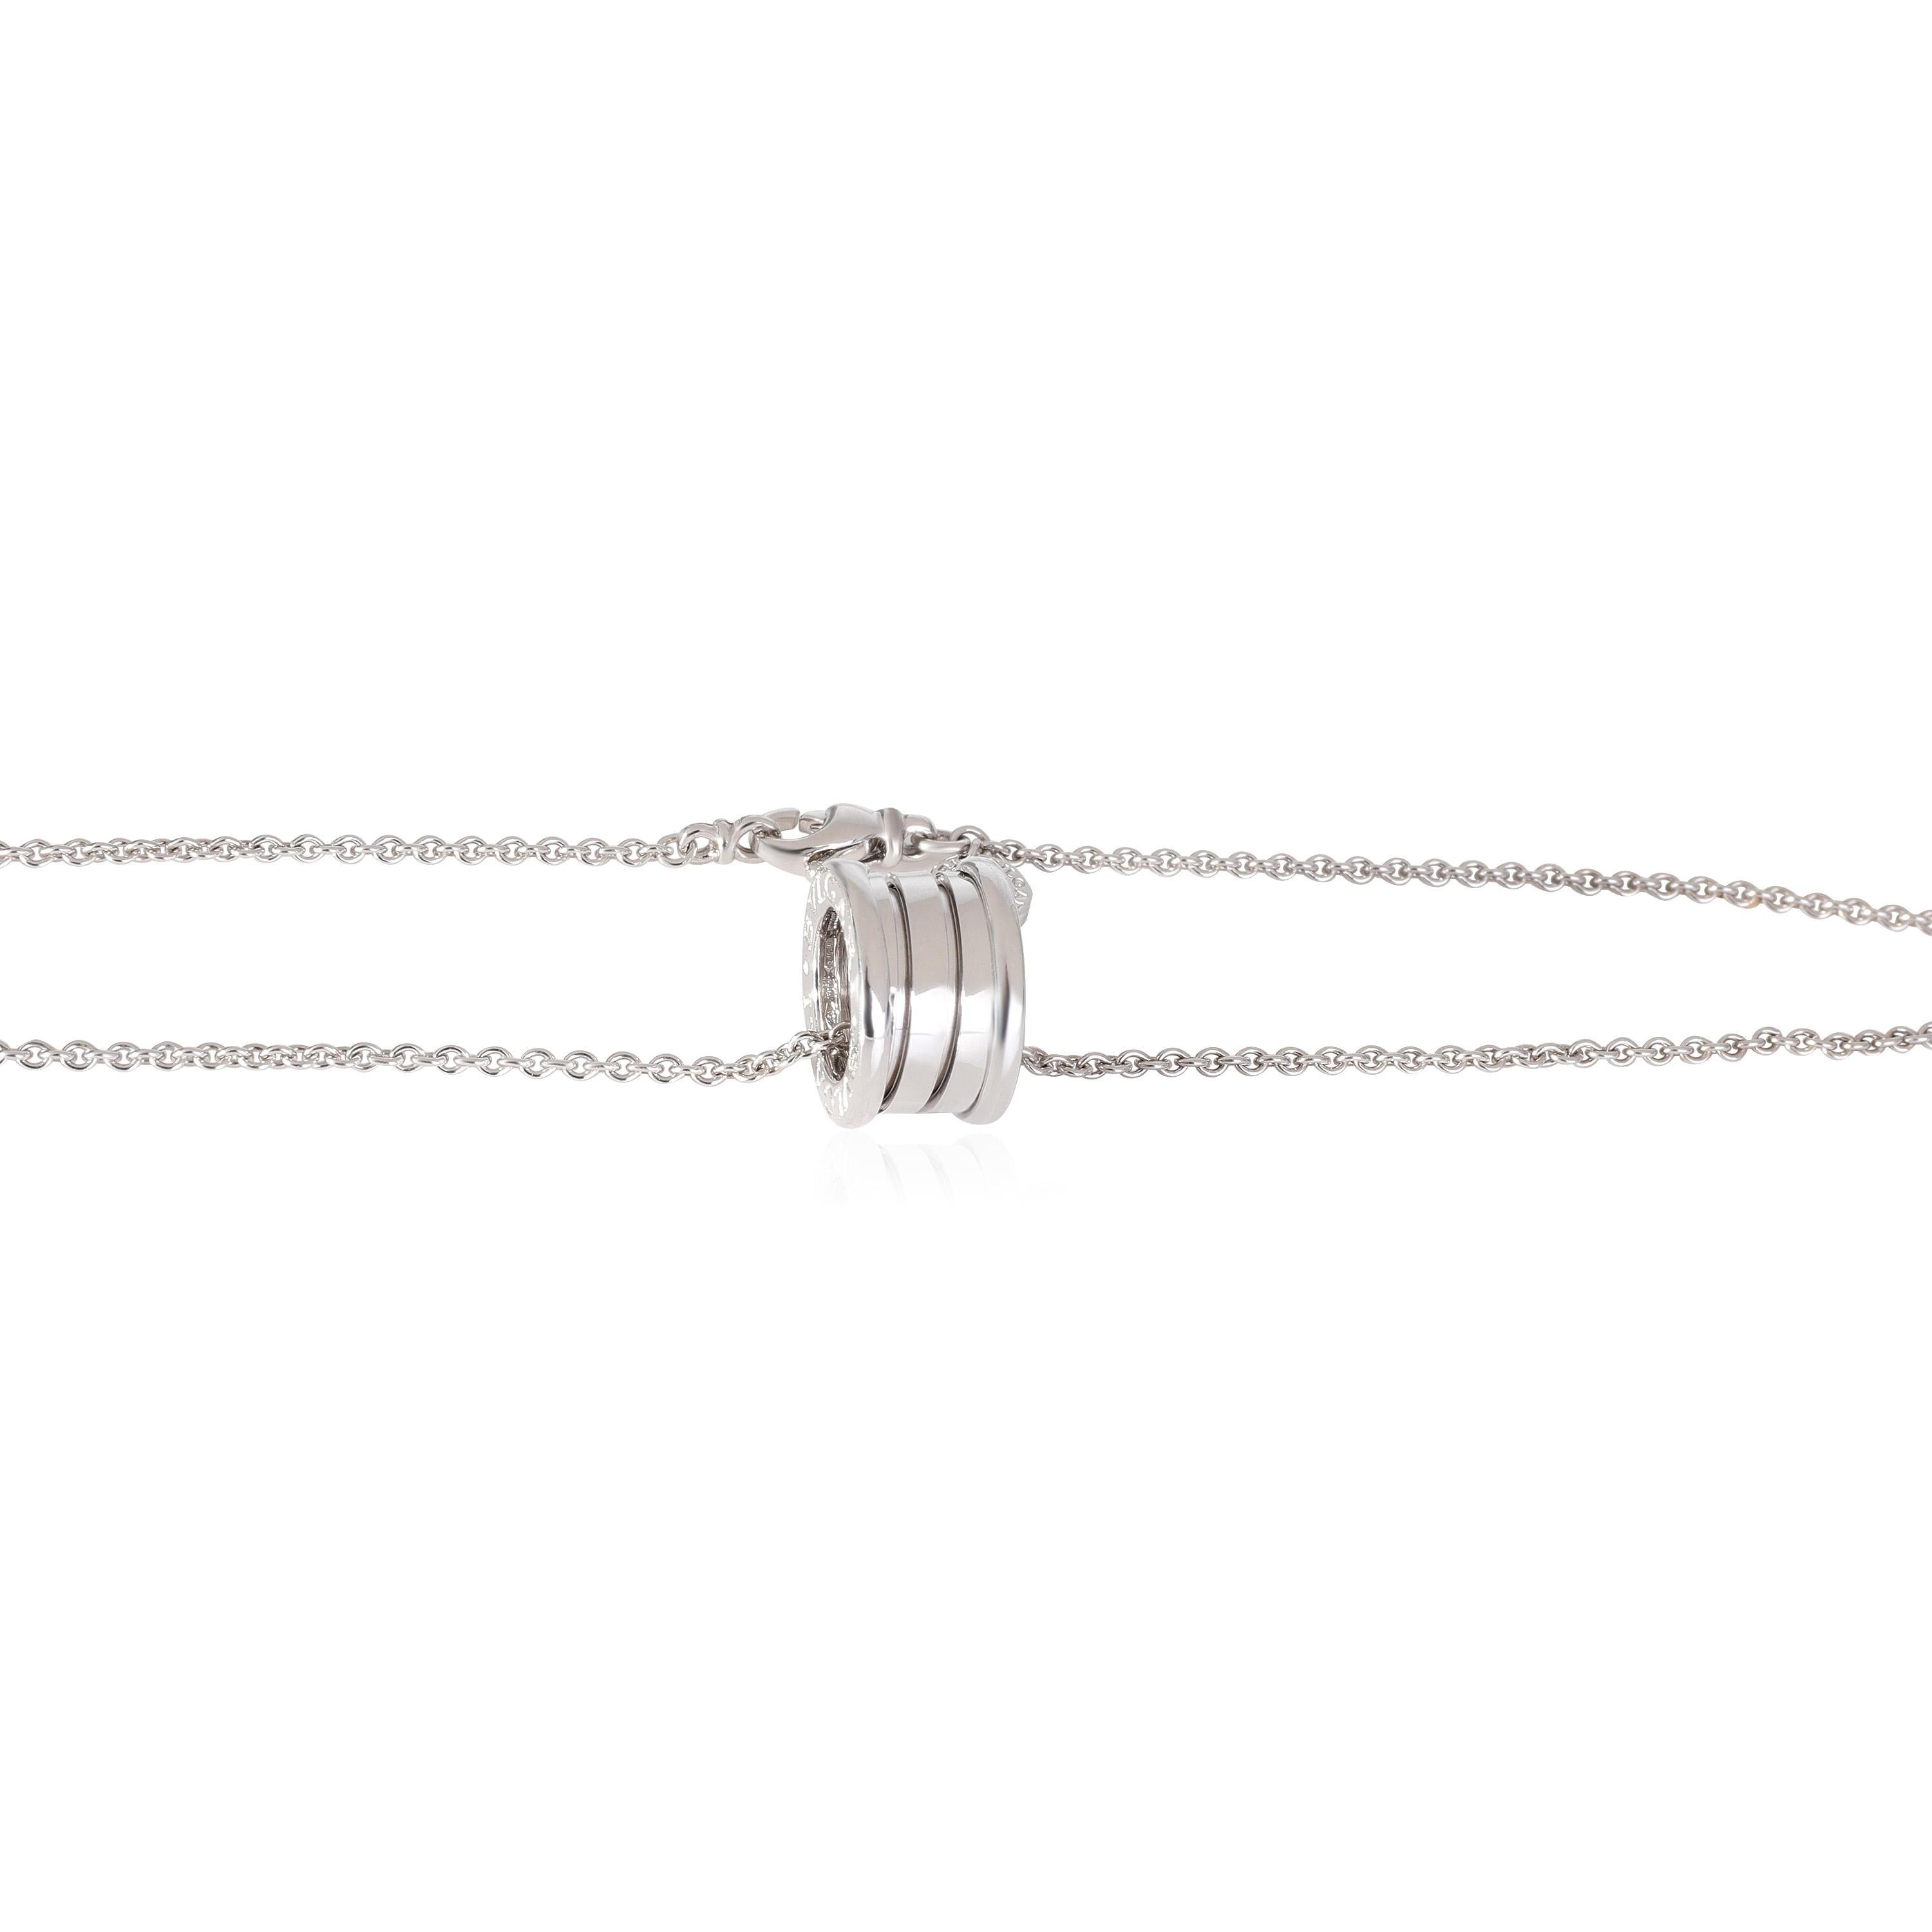 BVLGARI B.zero1 Pendant in 18k White Gold

PRIMARY DETAILS
SKU: 119556
Listing Title: BVLGARI B.zero1 Pendant in 18k White Gold
Condition Description: Retails for 3950 USD. In excellent condition and recently polished. Chain is 16 inches in